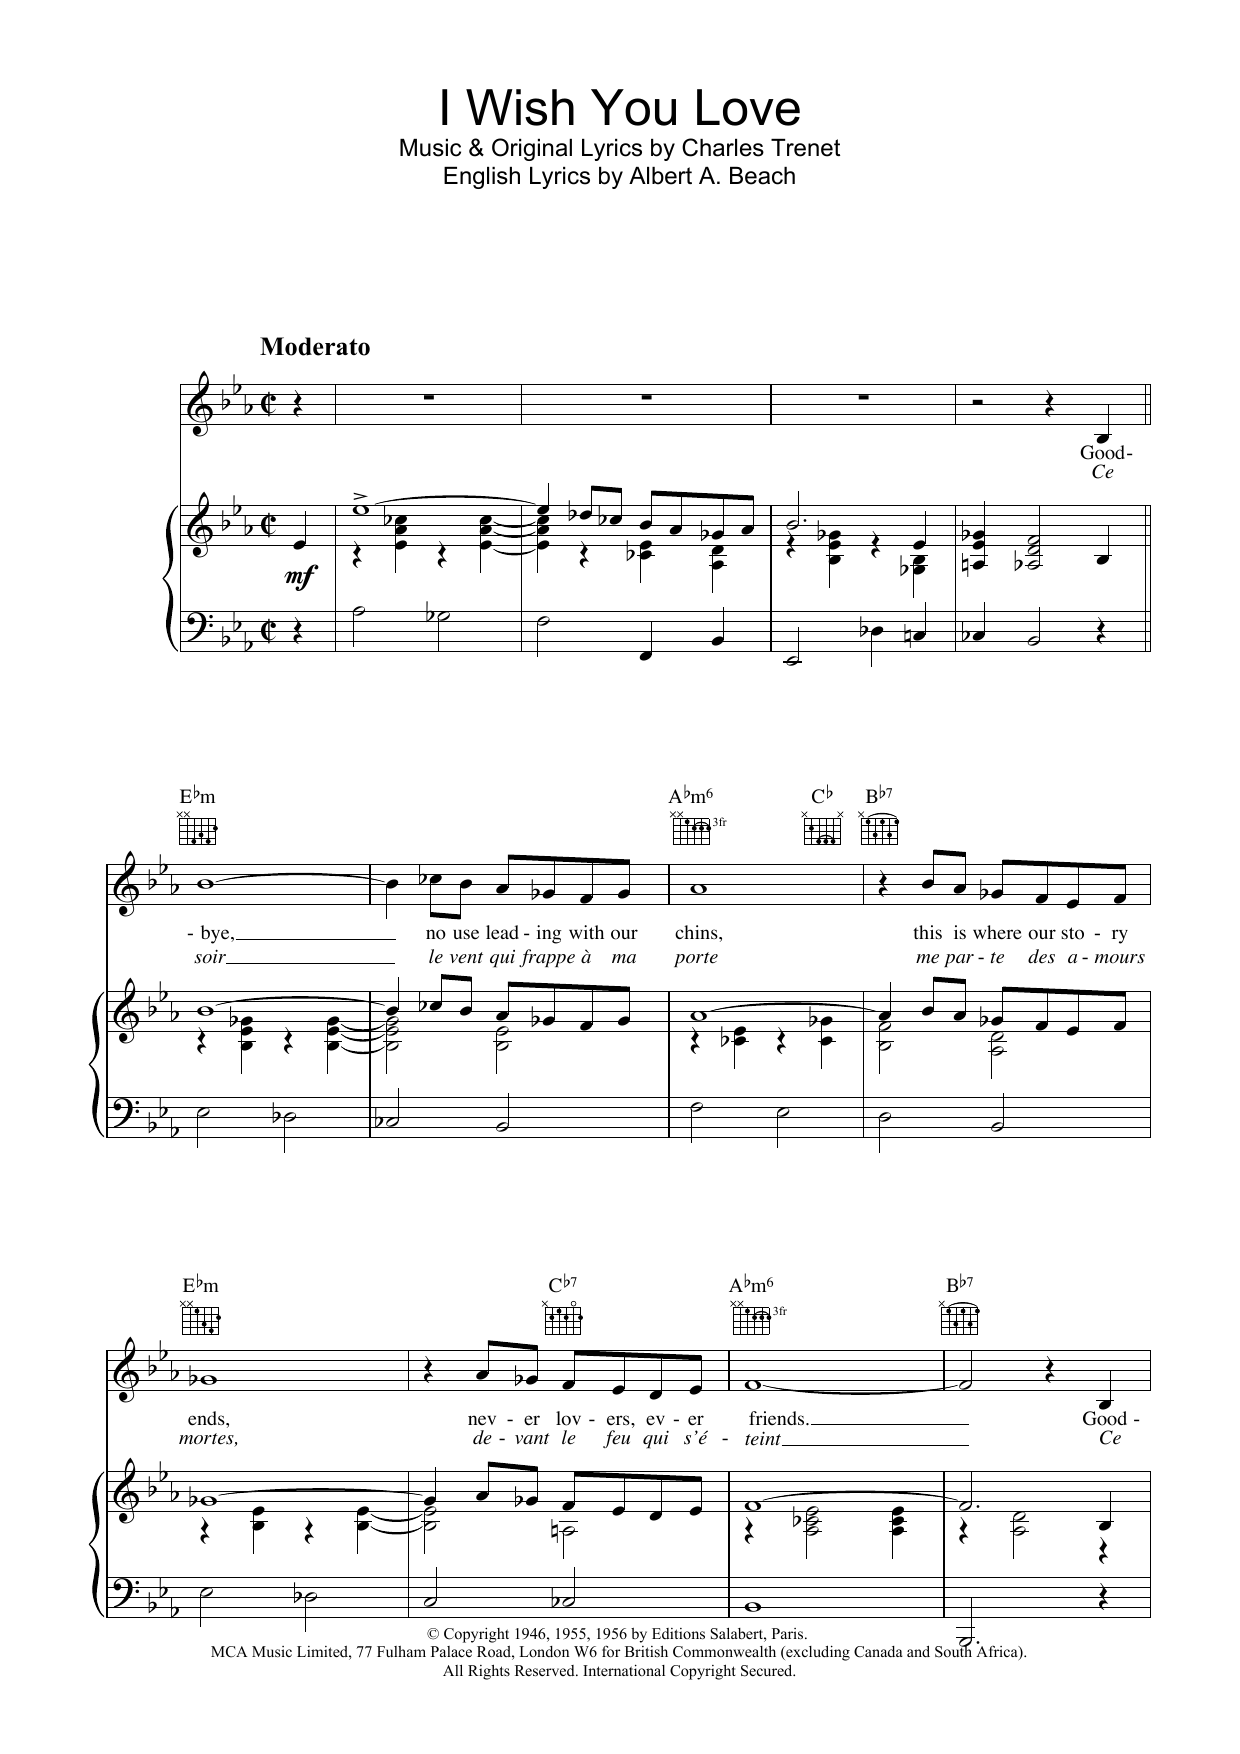 Paul Young I Wish You Love sheet music notes and chords. Download Printable PDF.